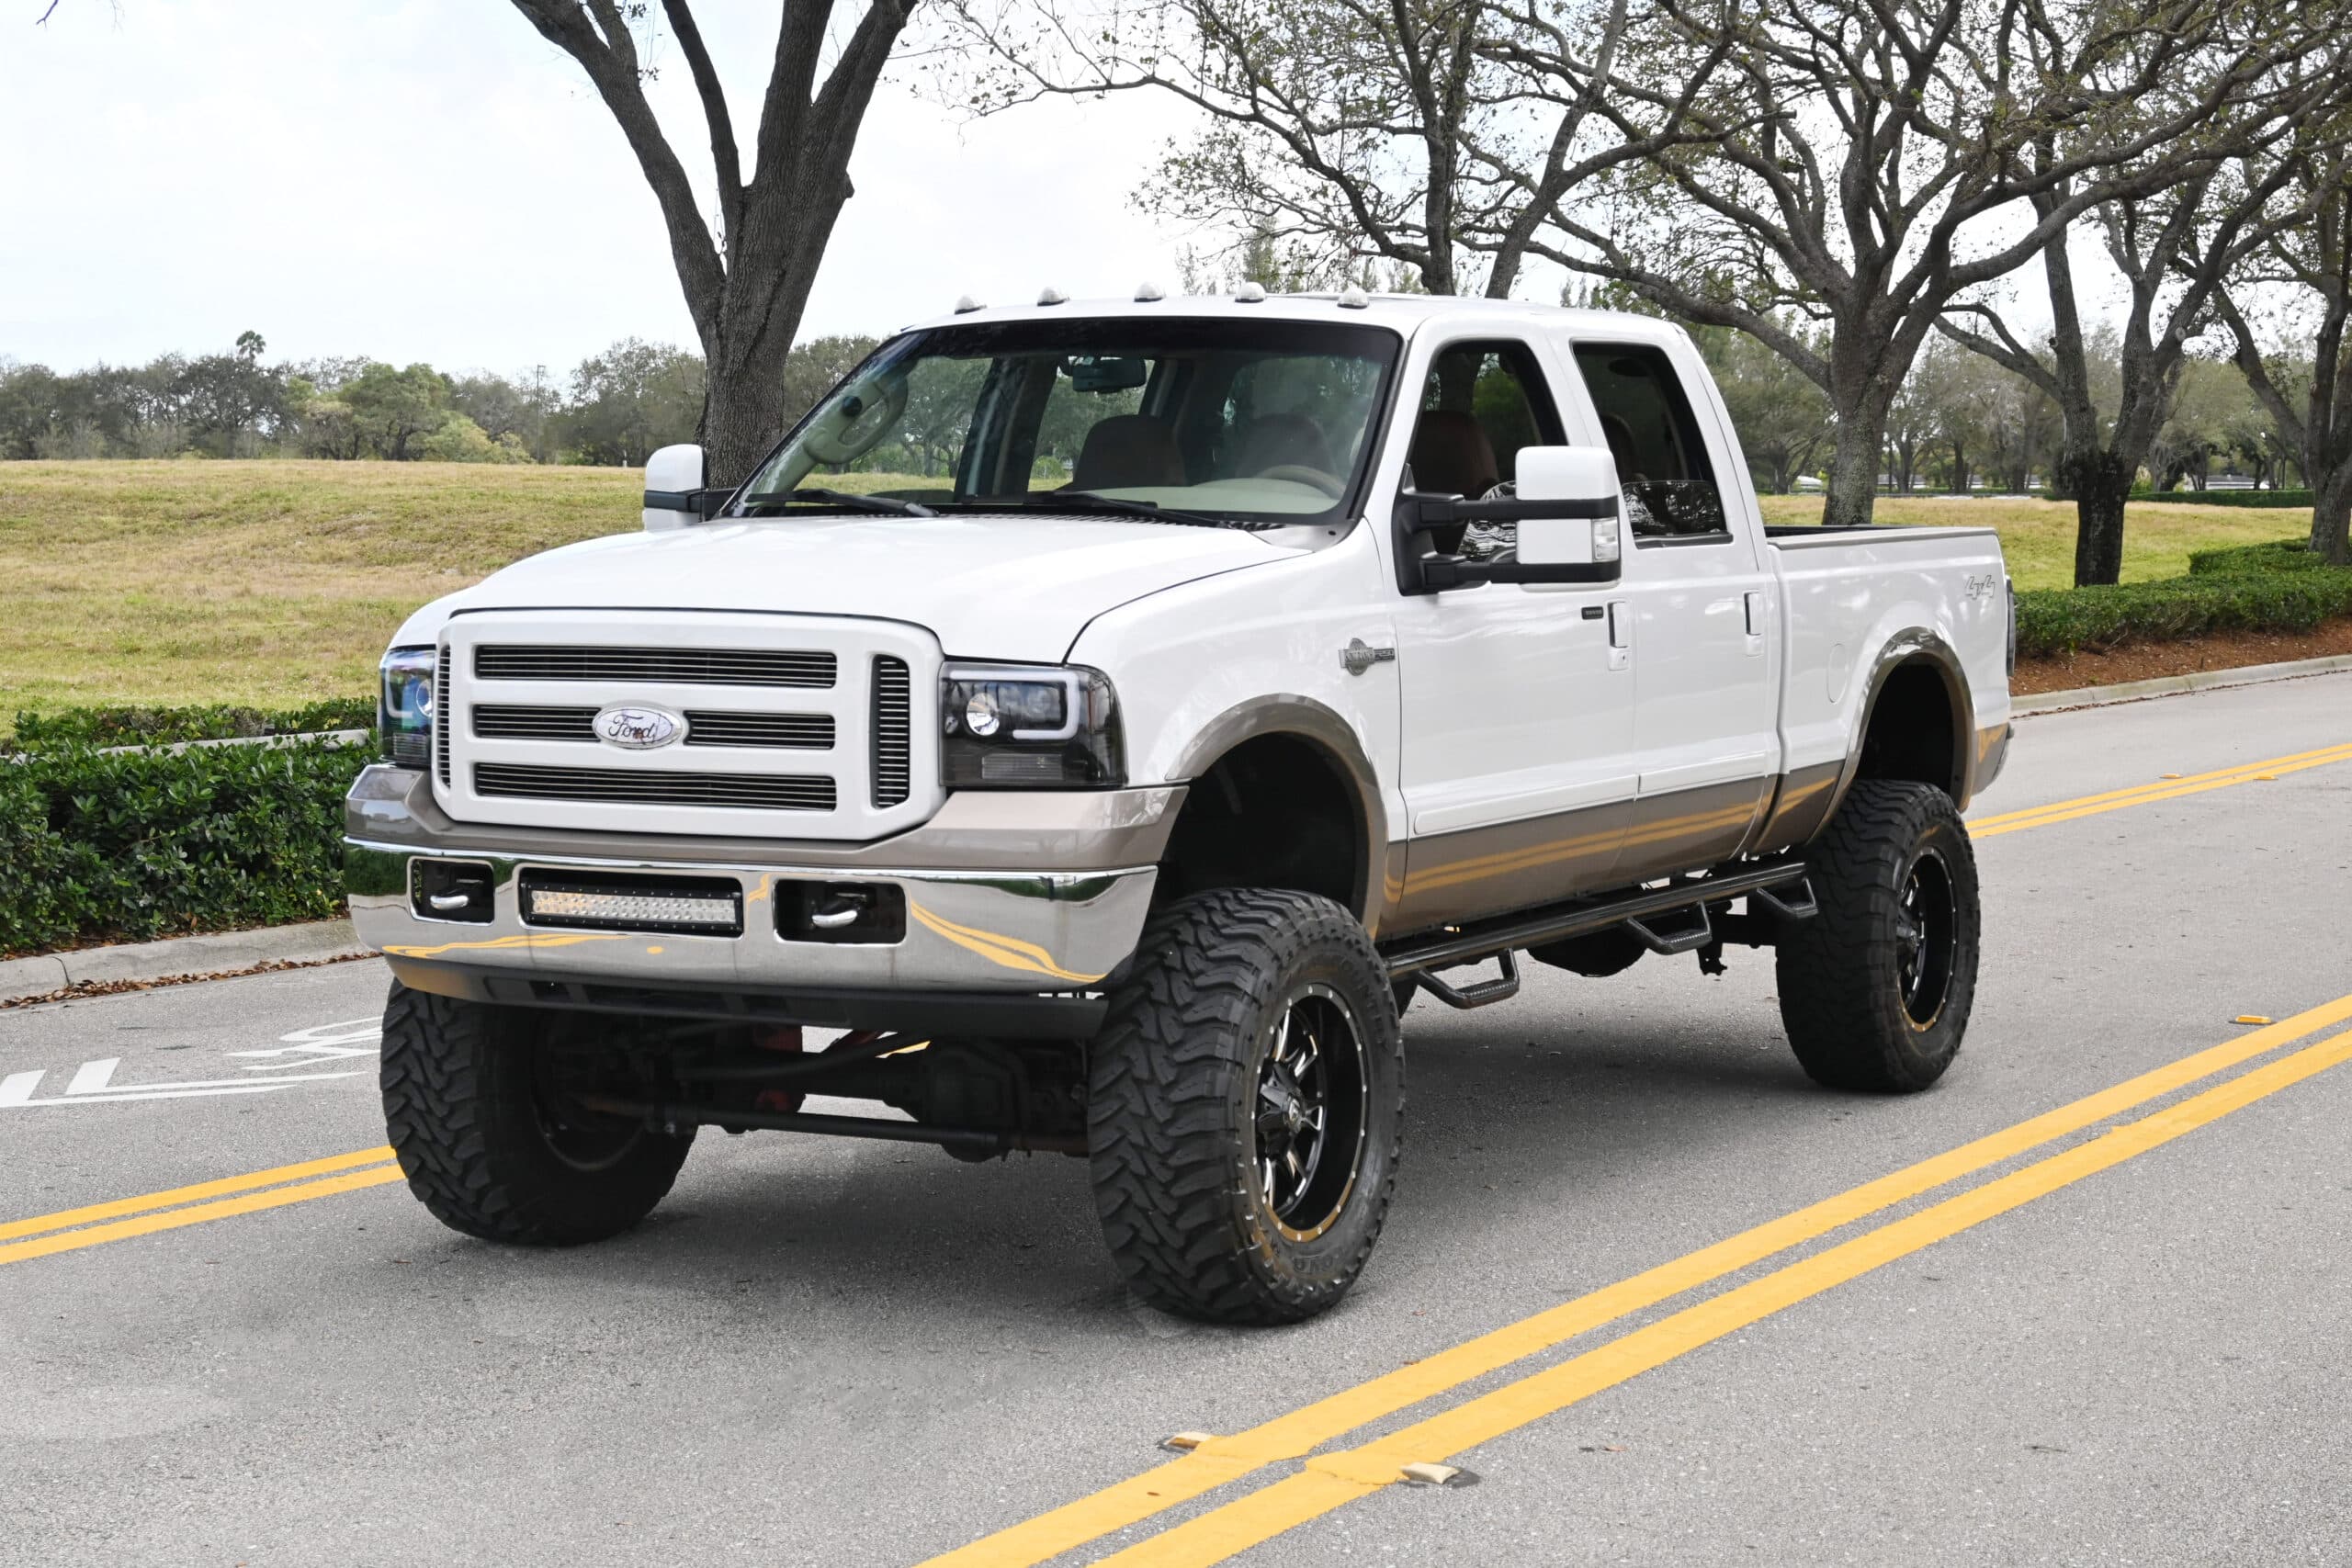 2006 Ford F250 4×4 Super Duty, Crew Cab, King Ranch, low miles, 6 Inch Lift, 37 inch tires